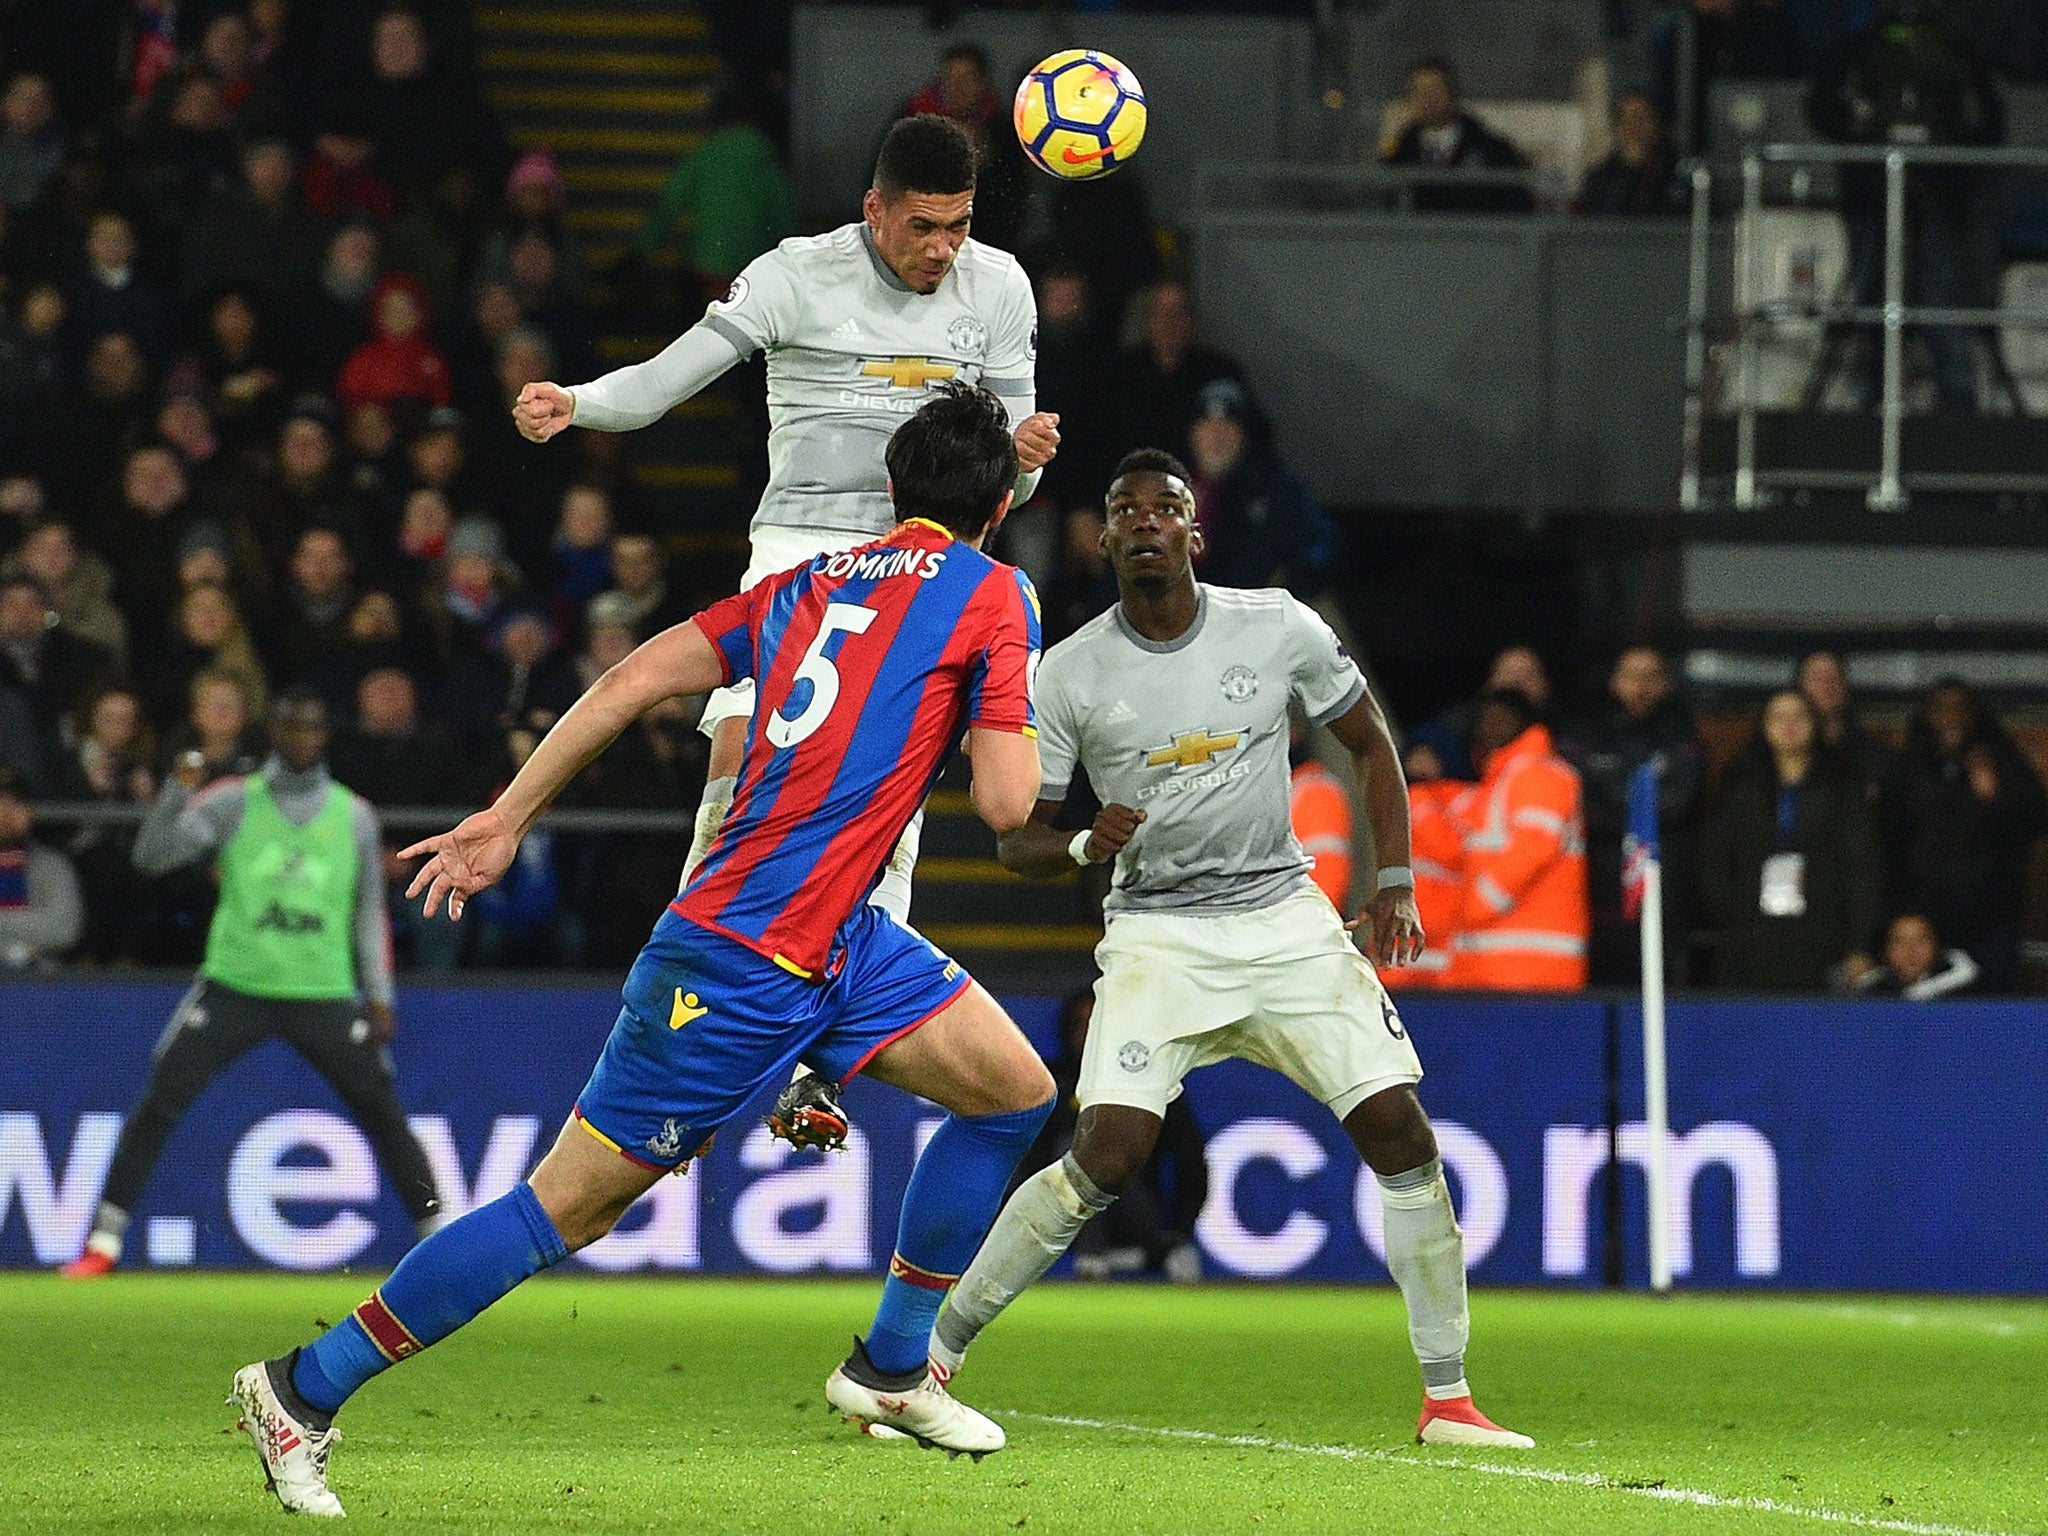 Chris Smalling rose highest to pull one back for United